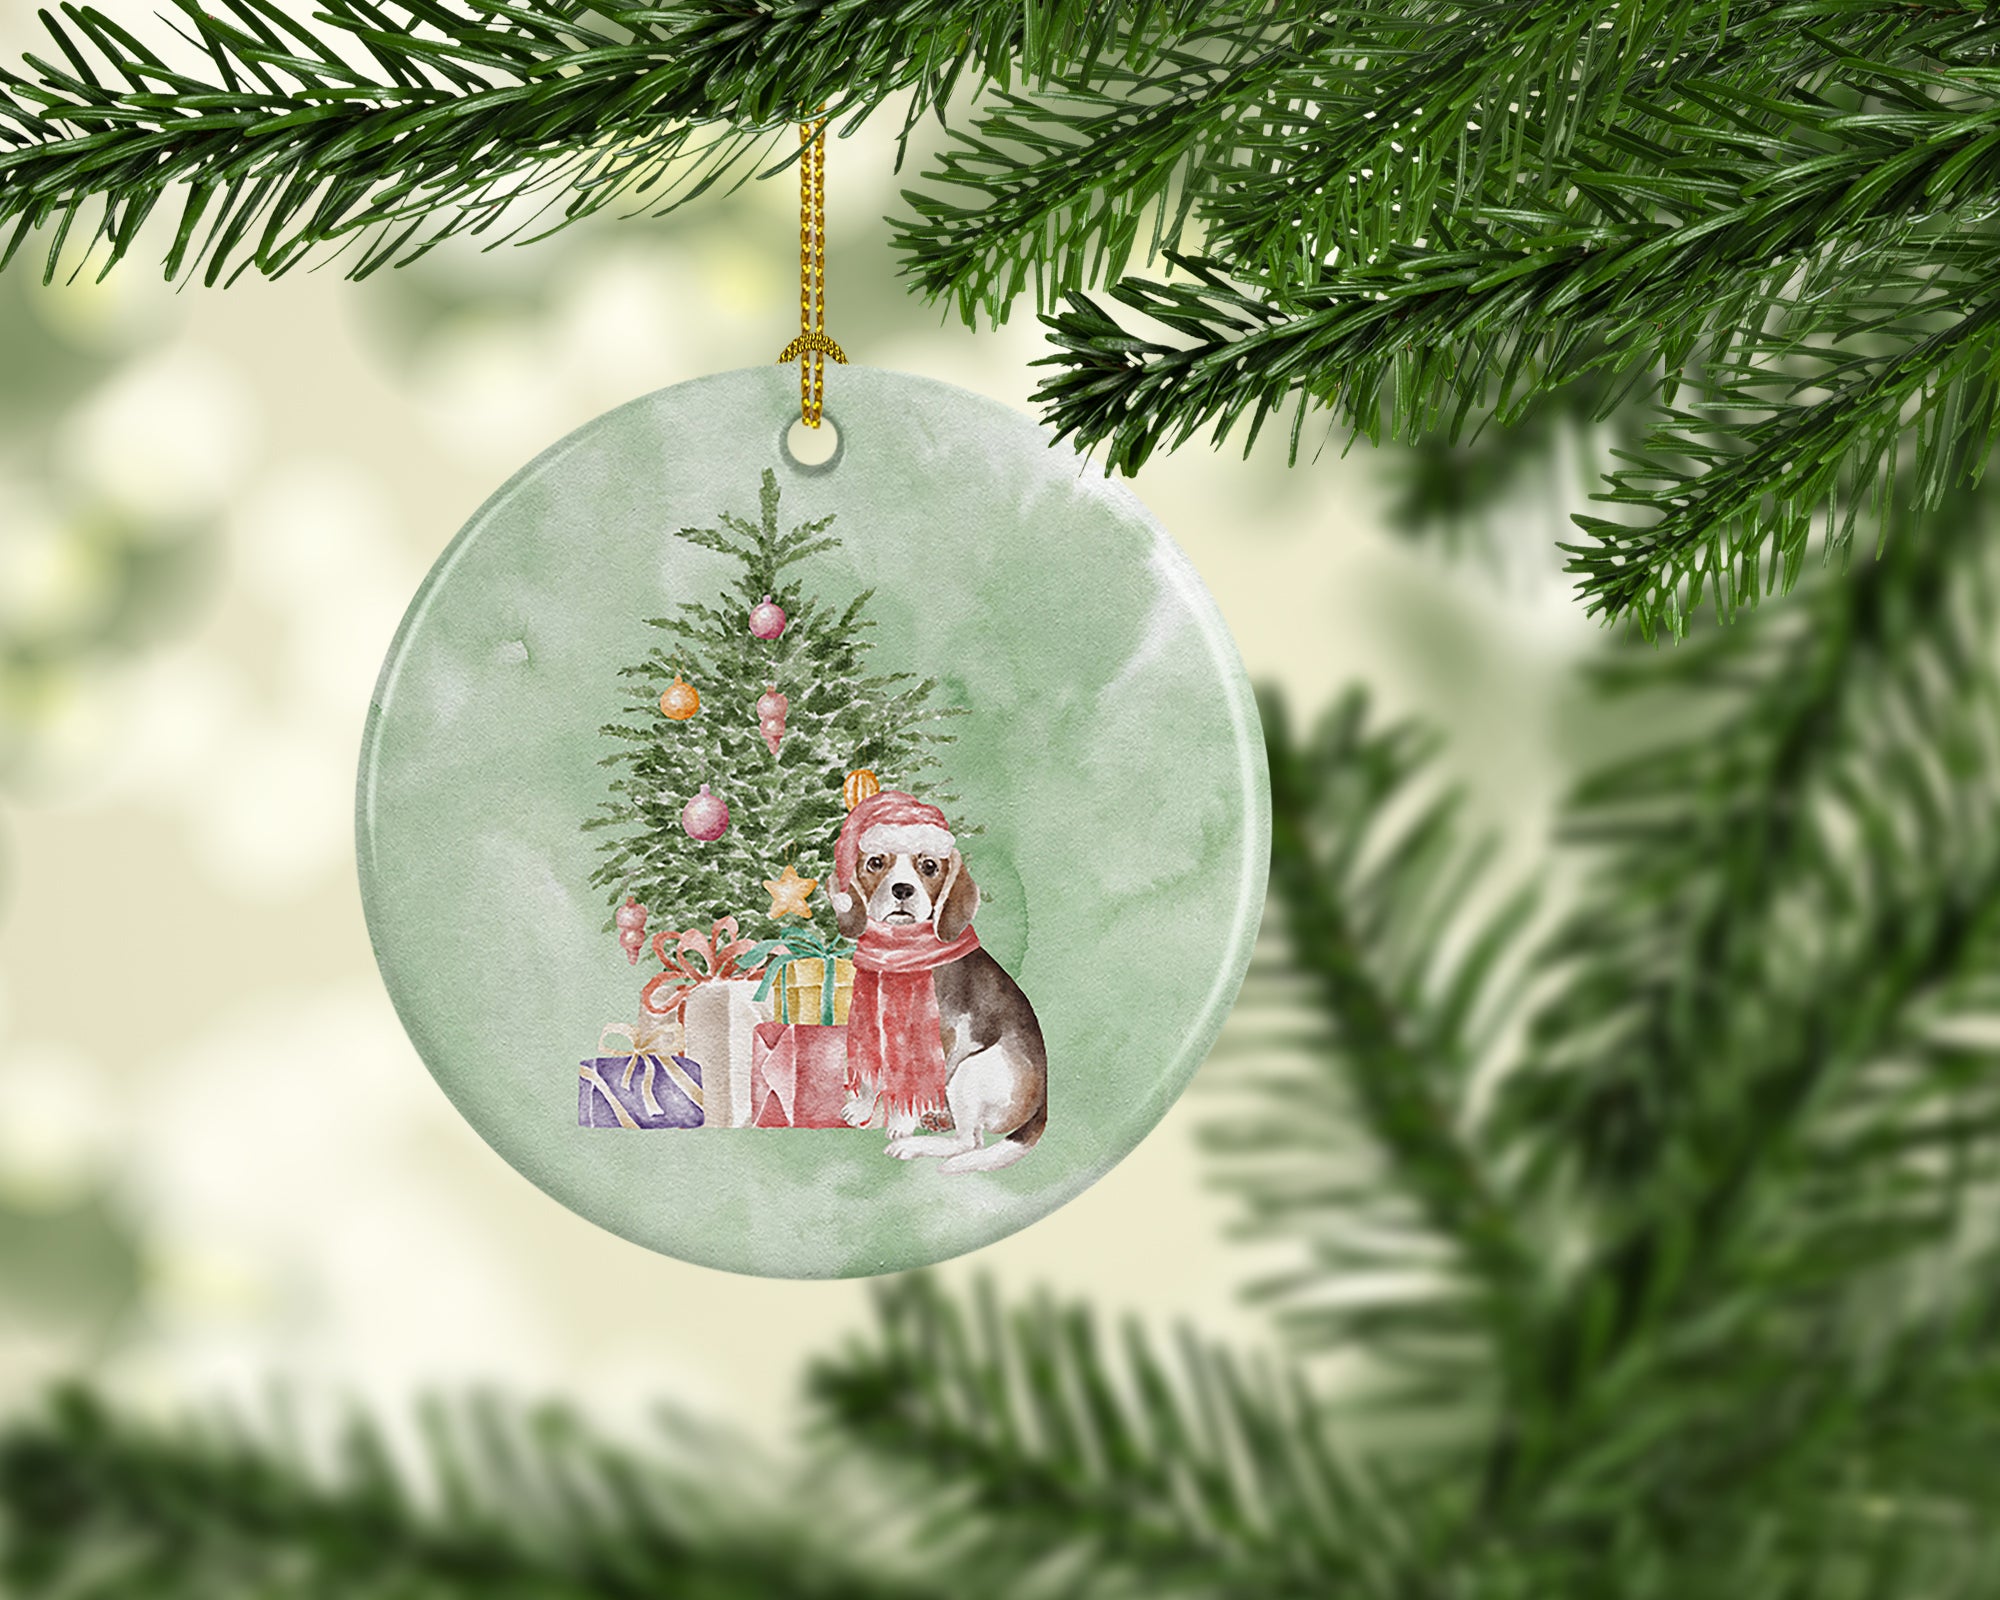 Buy this Christmas Beagle Puppy Ceramic Ornament